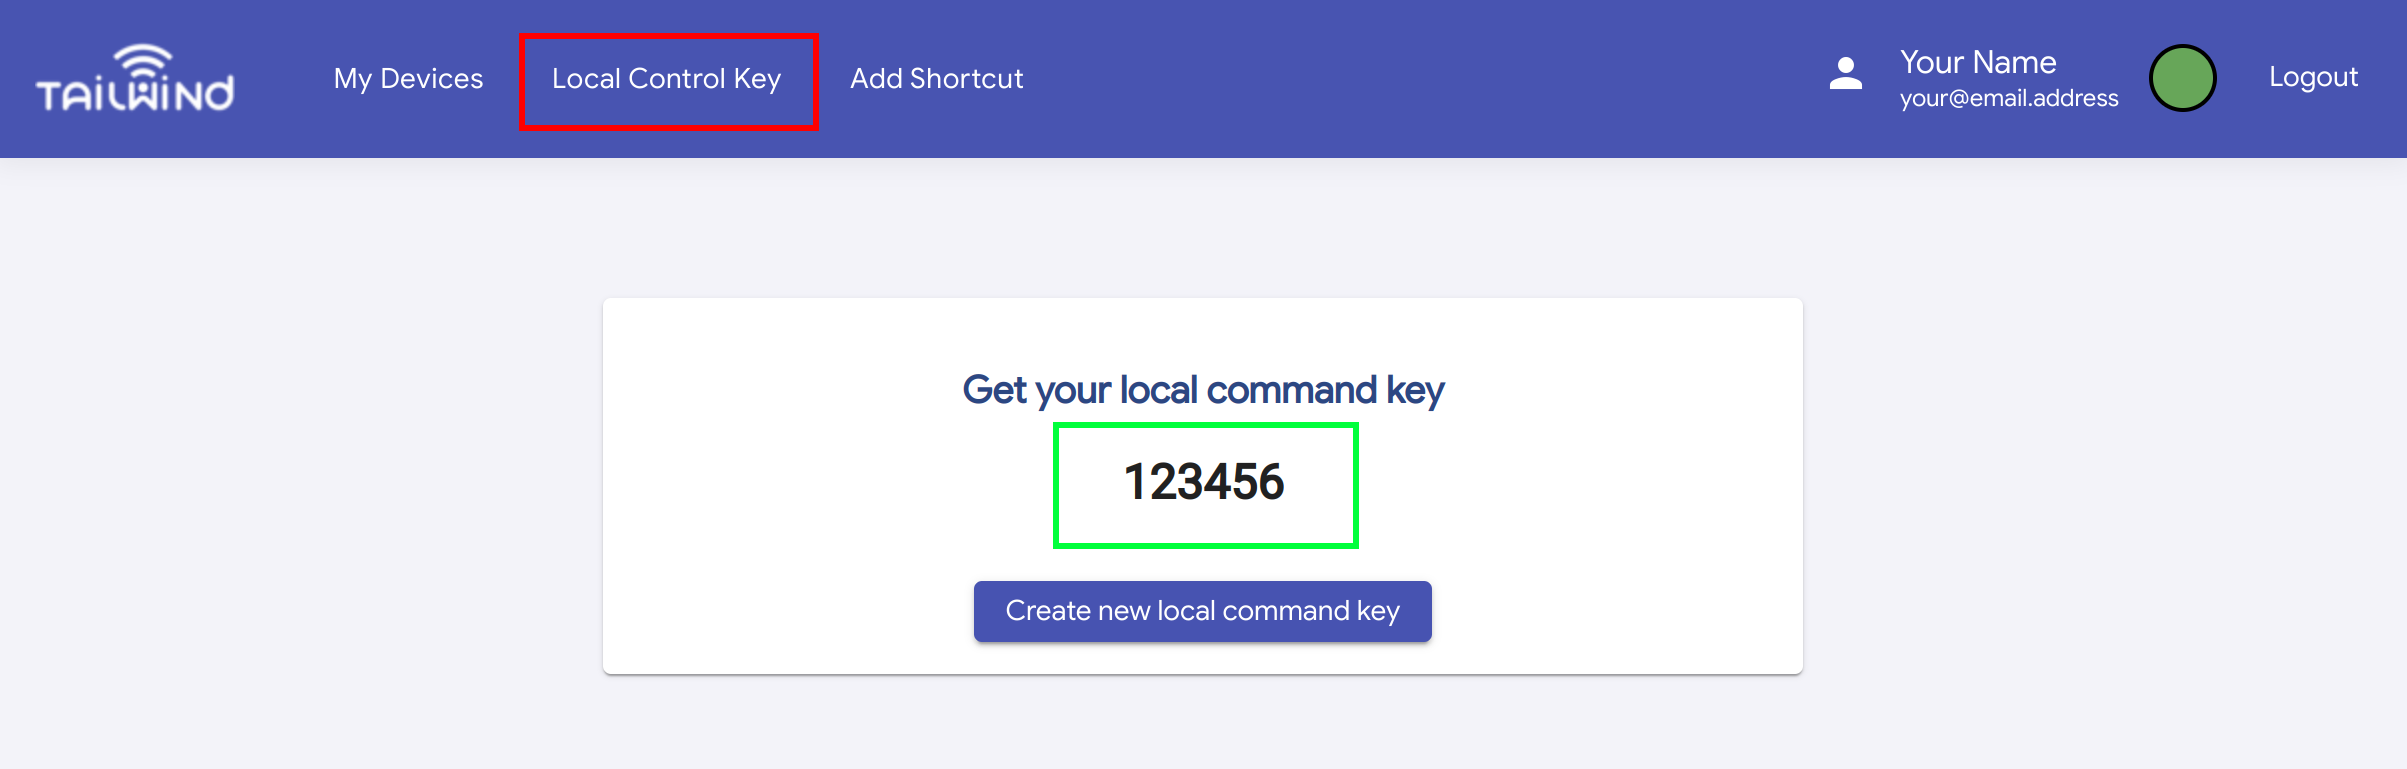 Screenshot showing where to find the Local Control Key